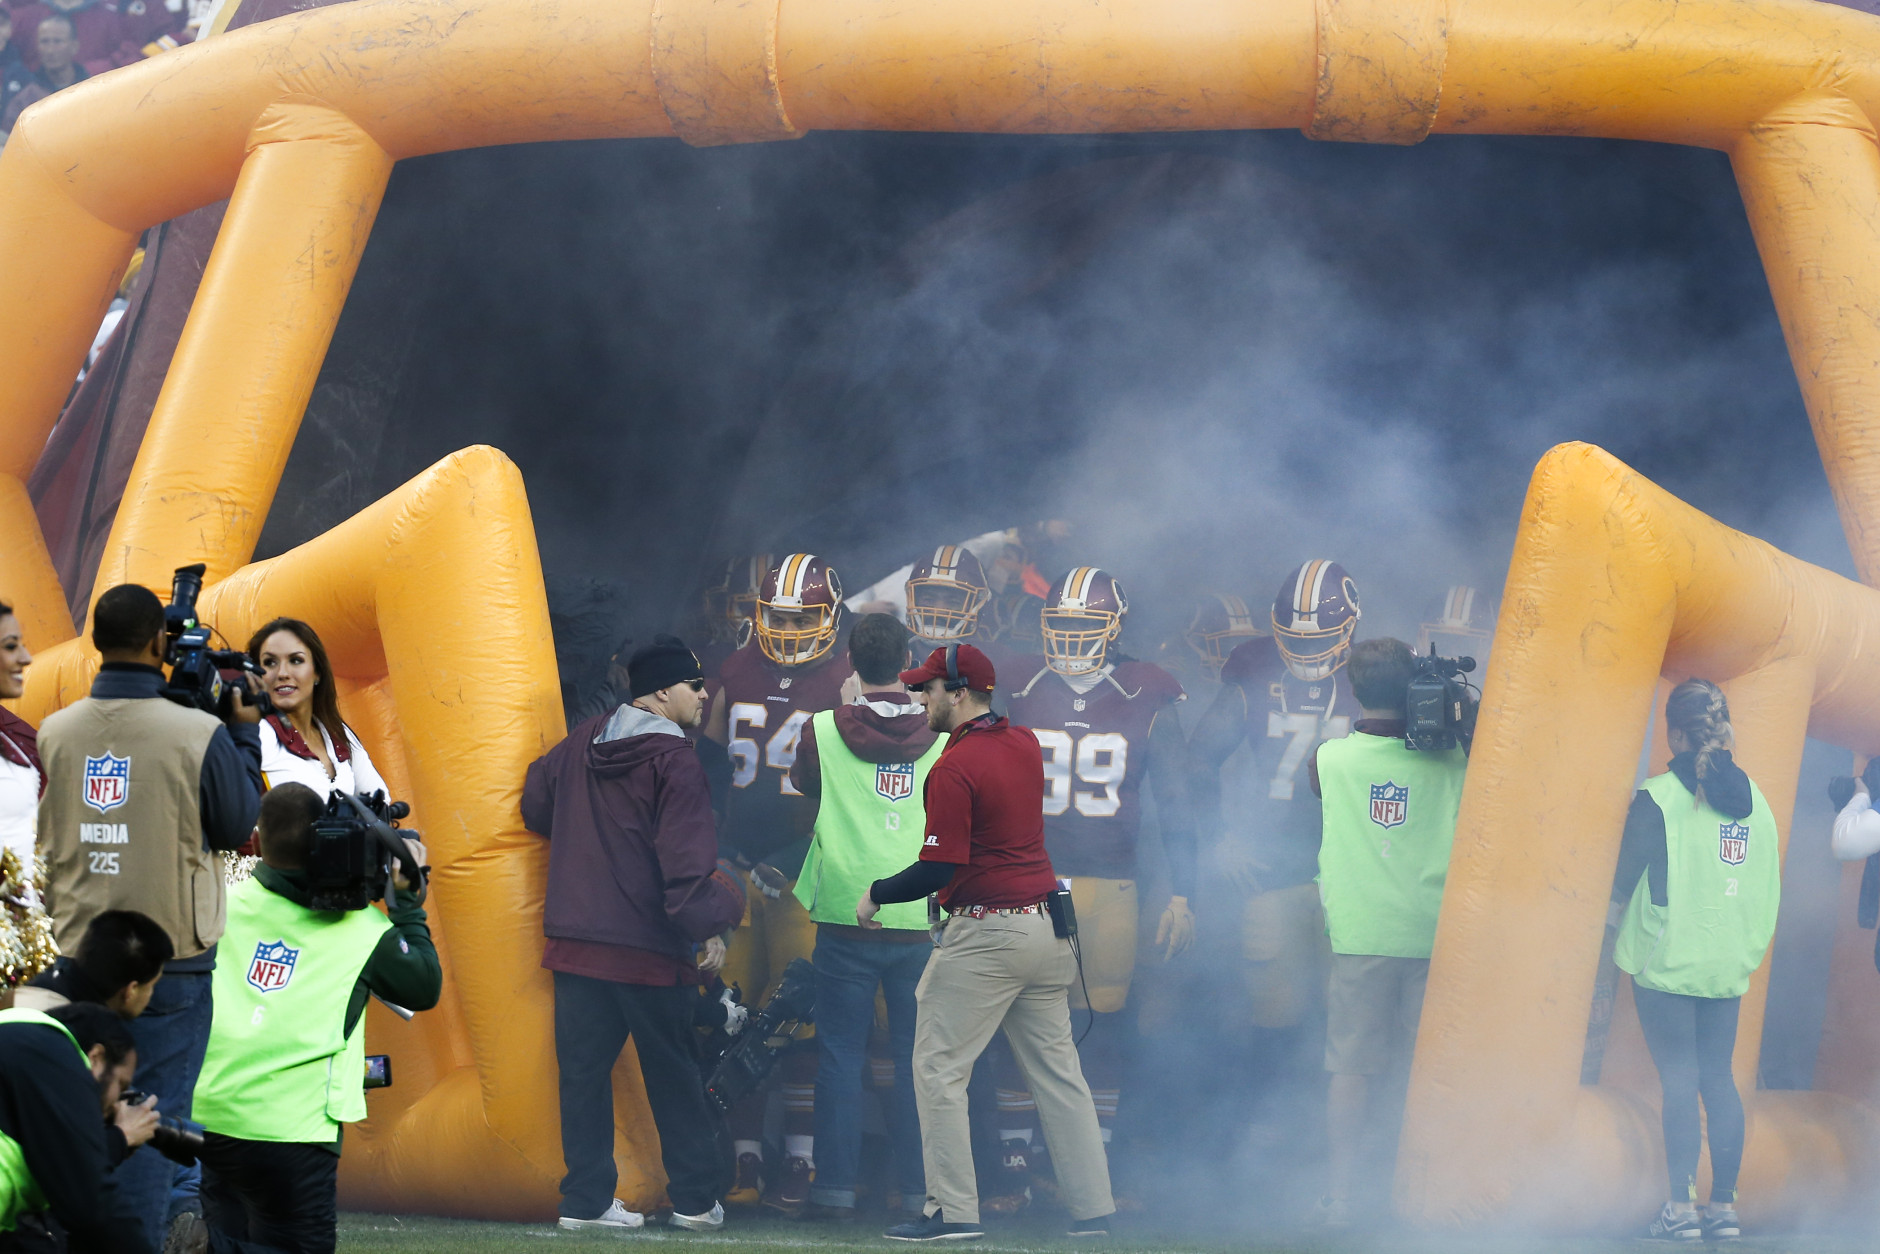 The Washington Redskins wait for their introduction before an NFL wild card playoff football game against the Green Bay Packers in Landover, Md., Sunday, Jan. 10, 2016. (AP Photo/Alex Brandon)